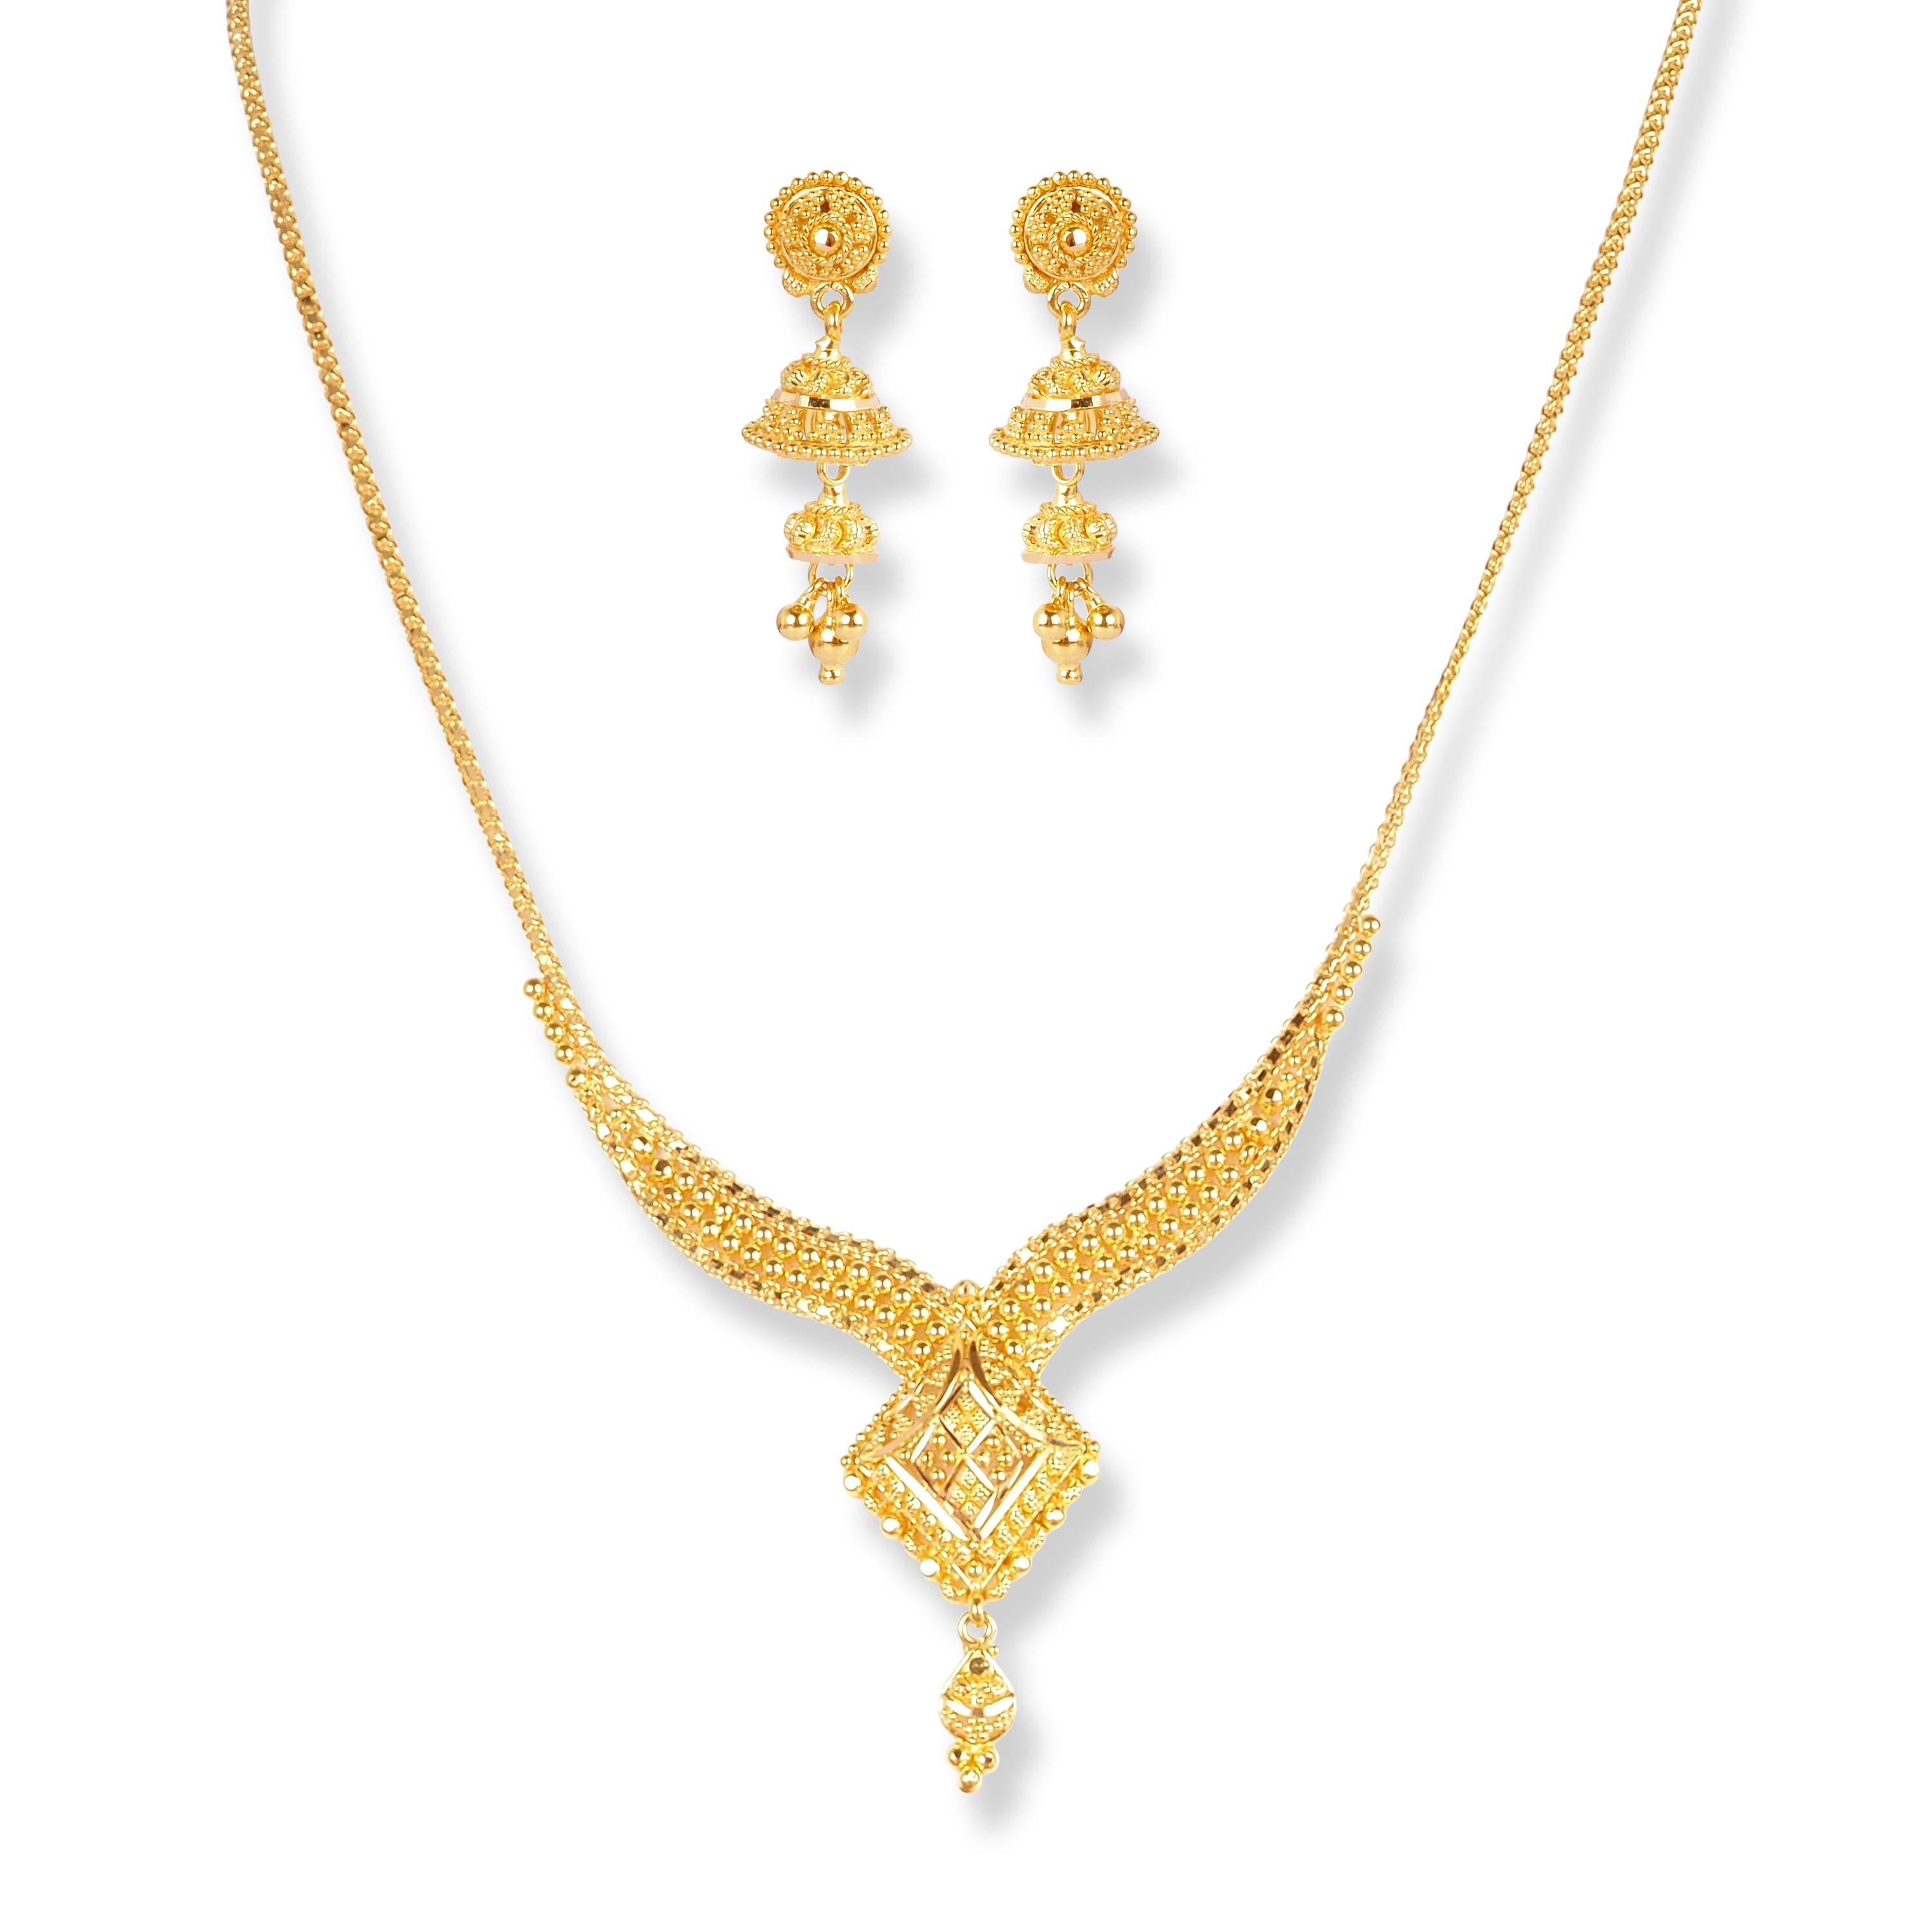 22ct Gold Necklace & Earring Suite with Filigree Work N-7918 - Minar Jewellers